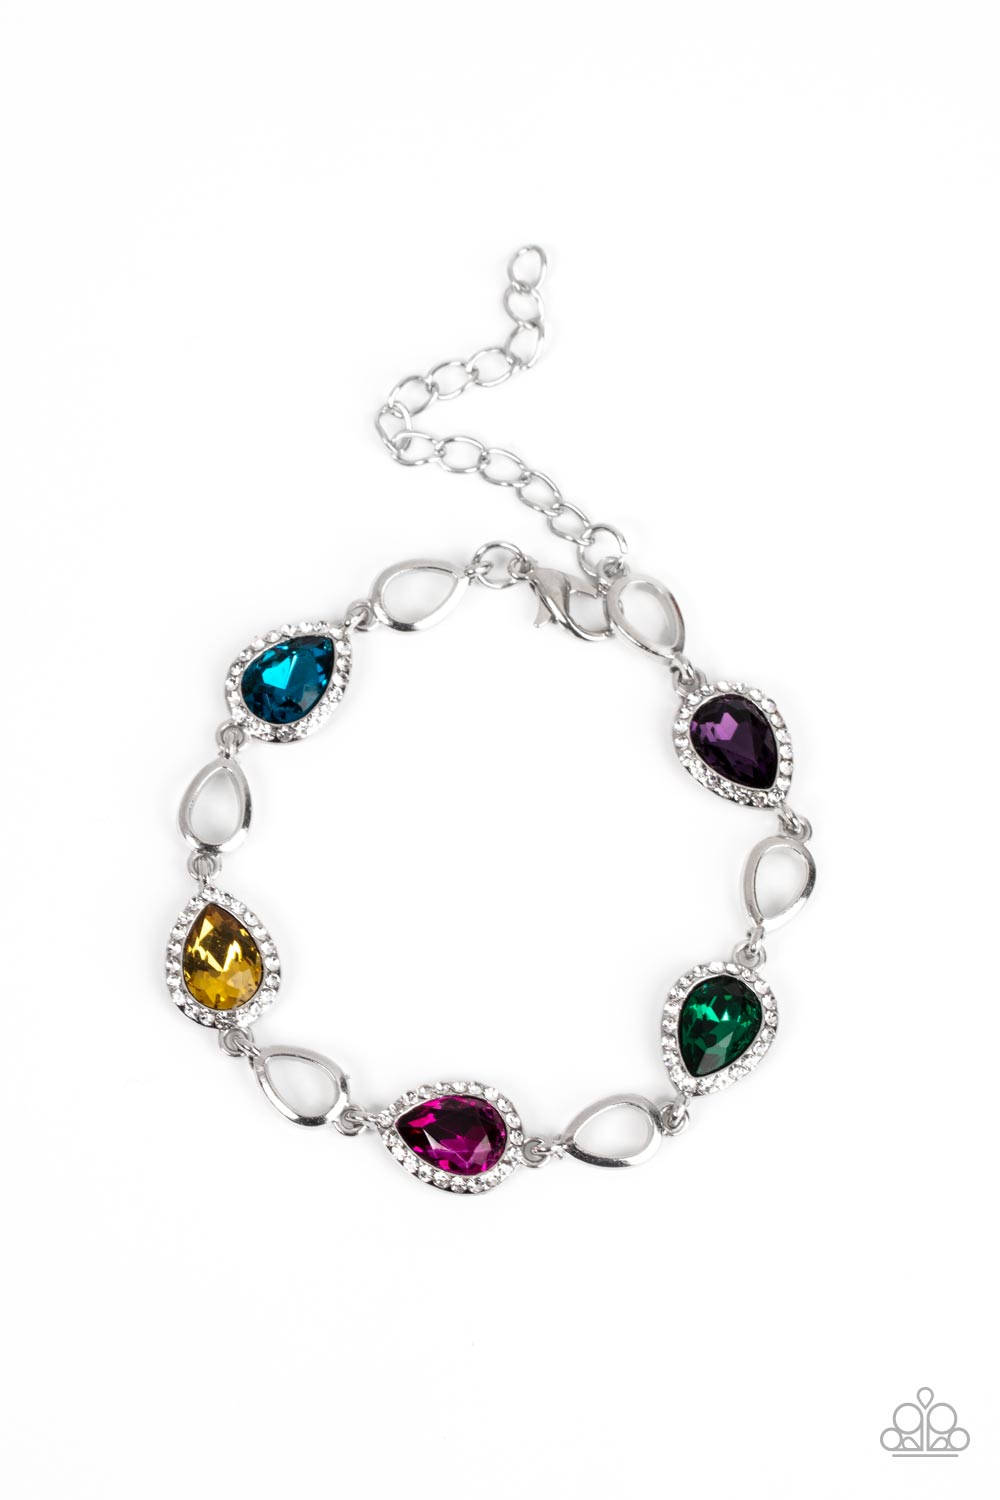 Timelessly Teary Multi Bracelet - Paparazzi Accessories  Bordered in glassy white rhinestones, glittery multicolored teardrop gems link with airy silver teardrop frames around the wrist for a timeless twinkle. Features an adjustable clasp closure.  Sold as one individual bracelet.